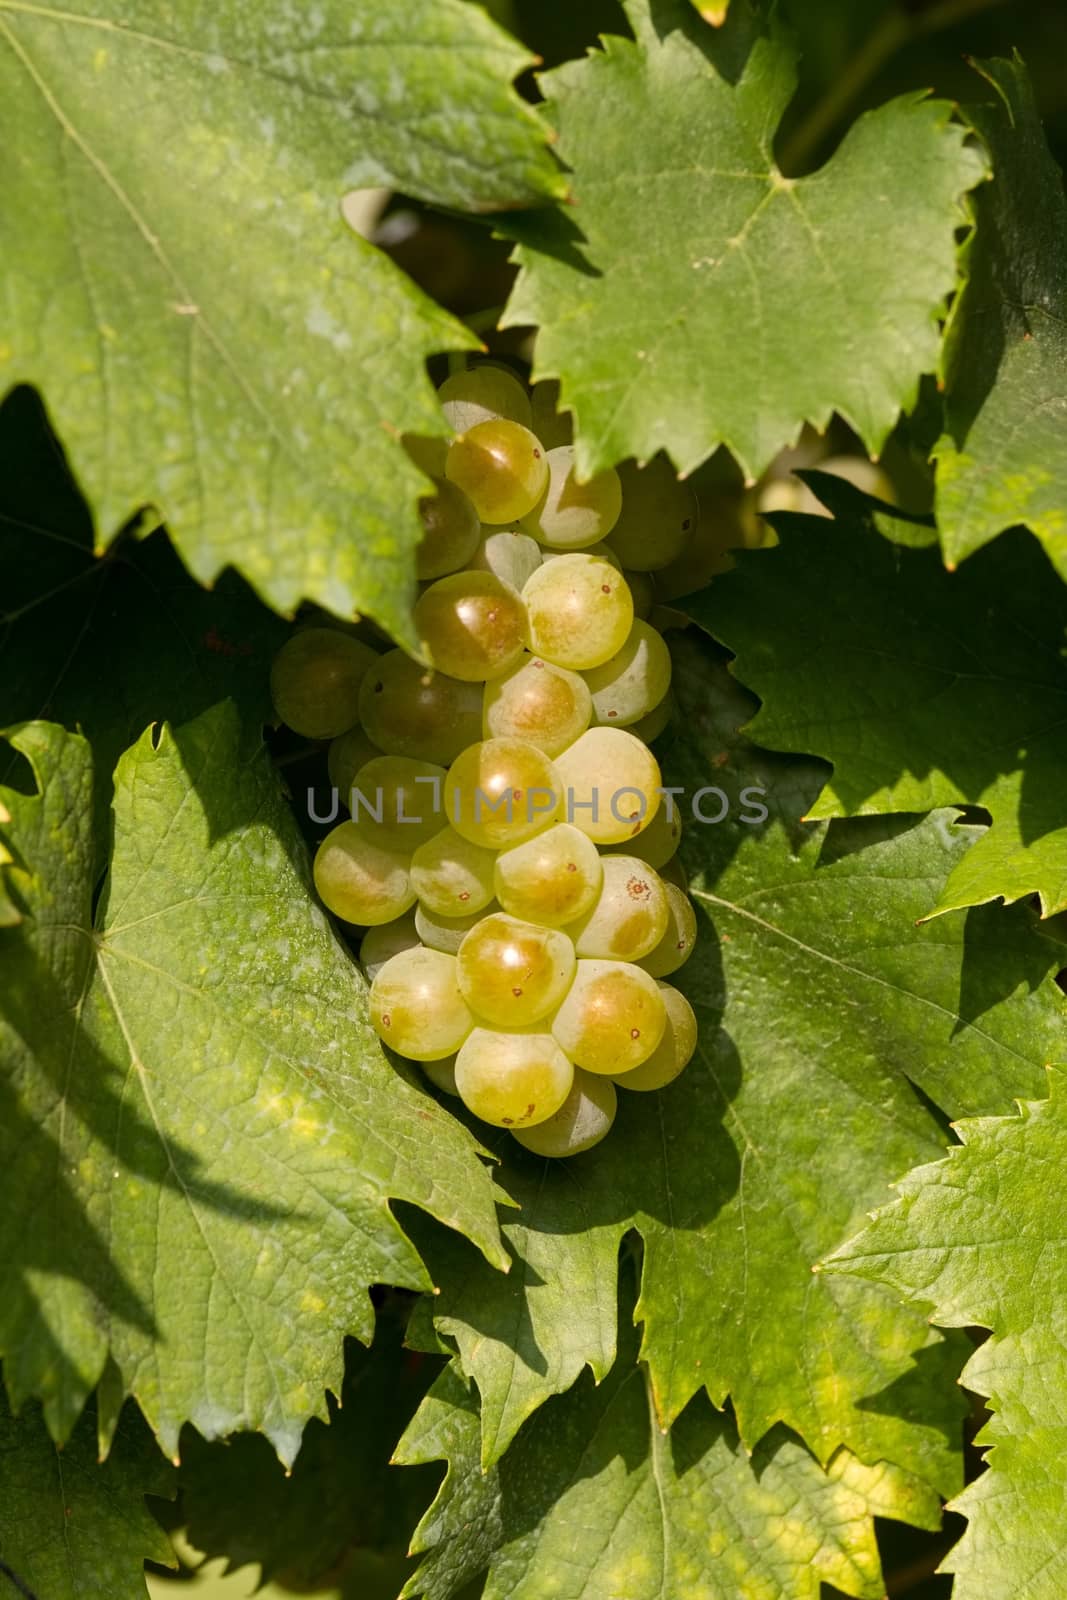 Tasty green Welschriesling grapes by Digoarpi